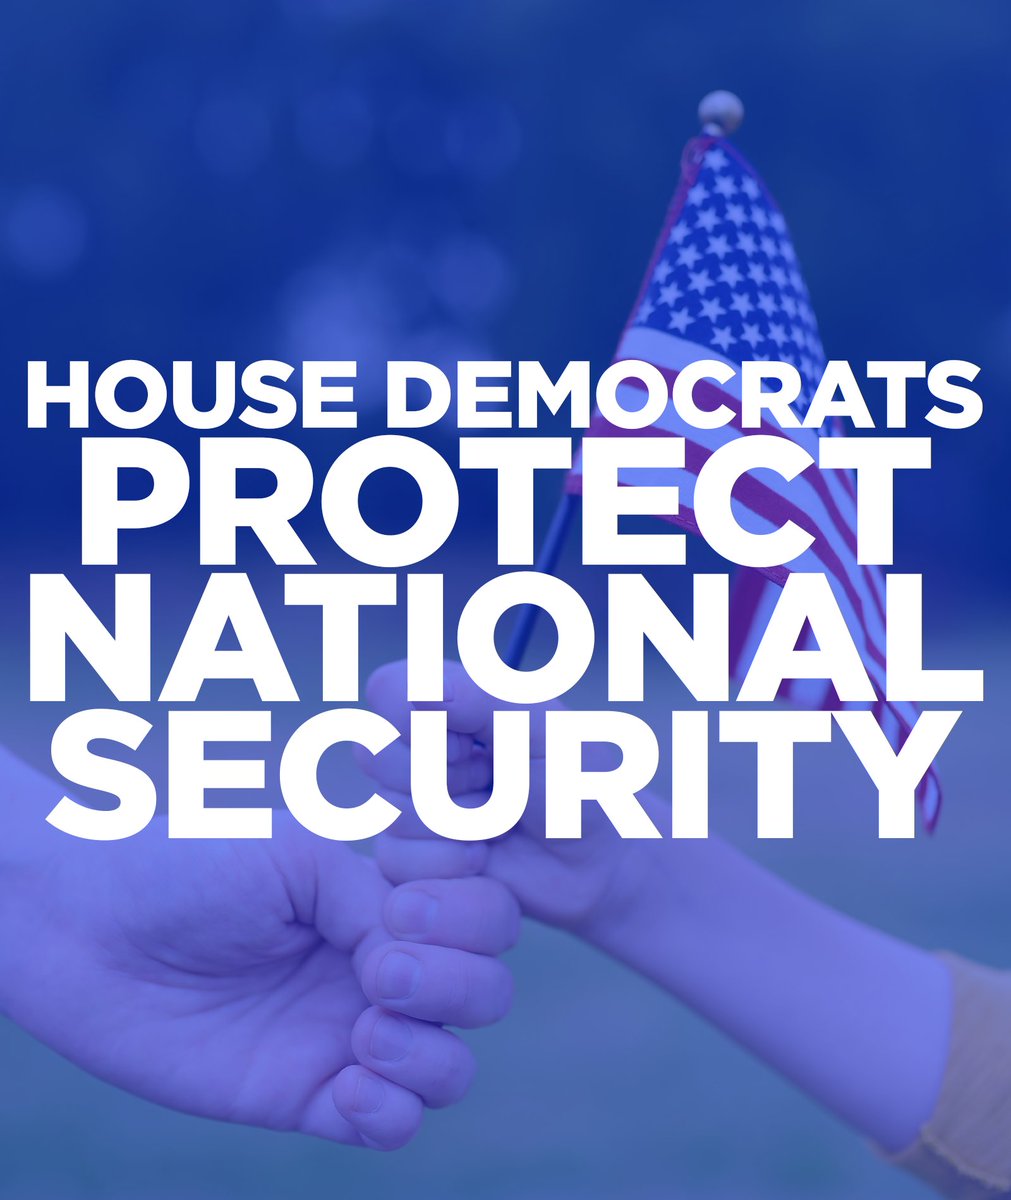 I'm steadfast in protecting America's national security. That's why I've supported advancing funding to support Ukraine against Putin's aggression and safeguard the U.S. from global threats. Our nation's security depends on it.